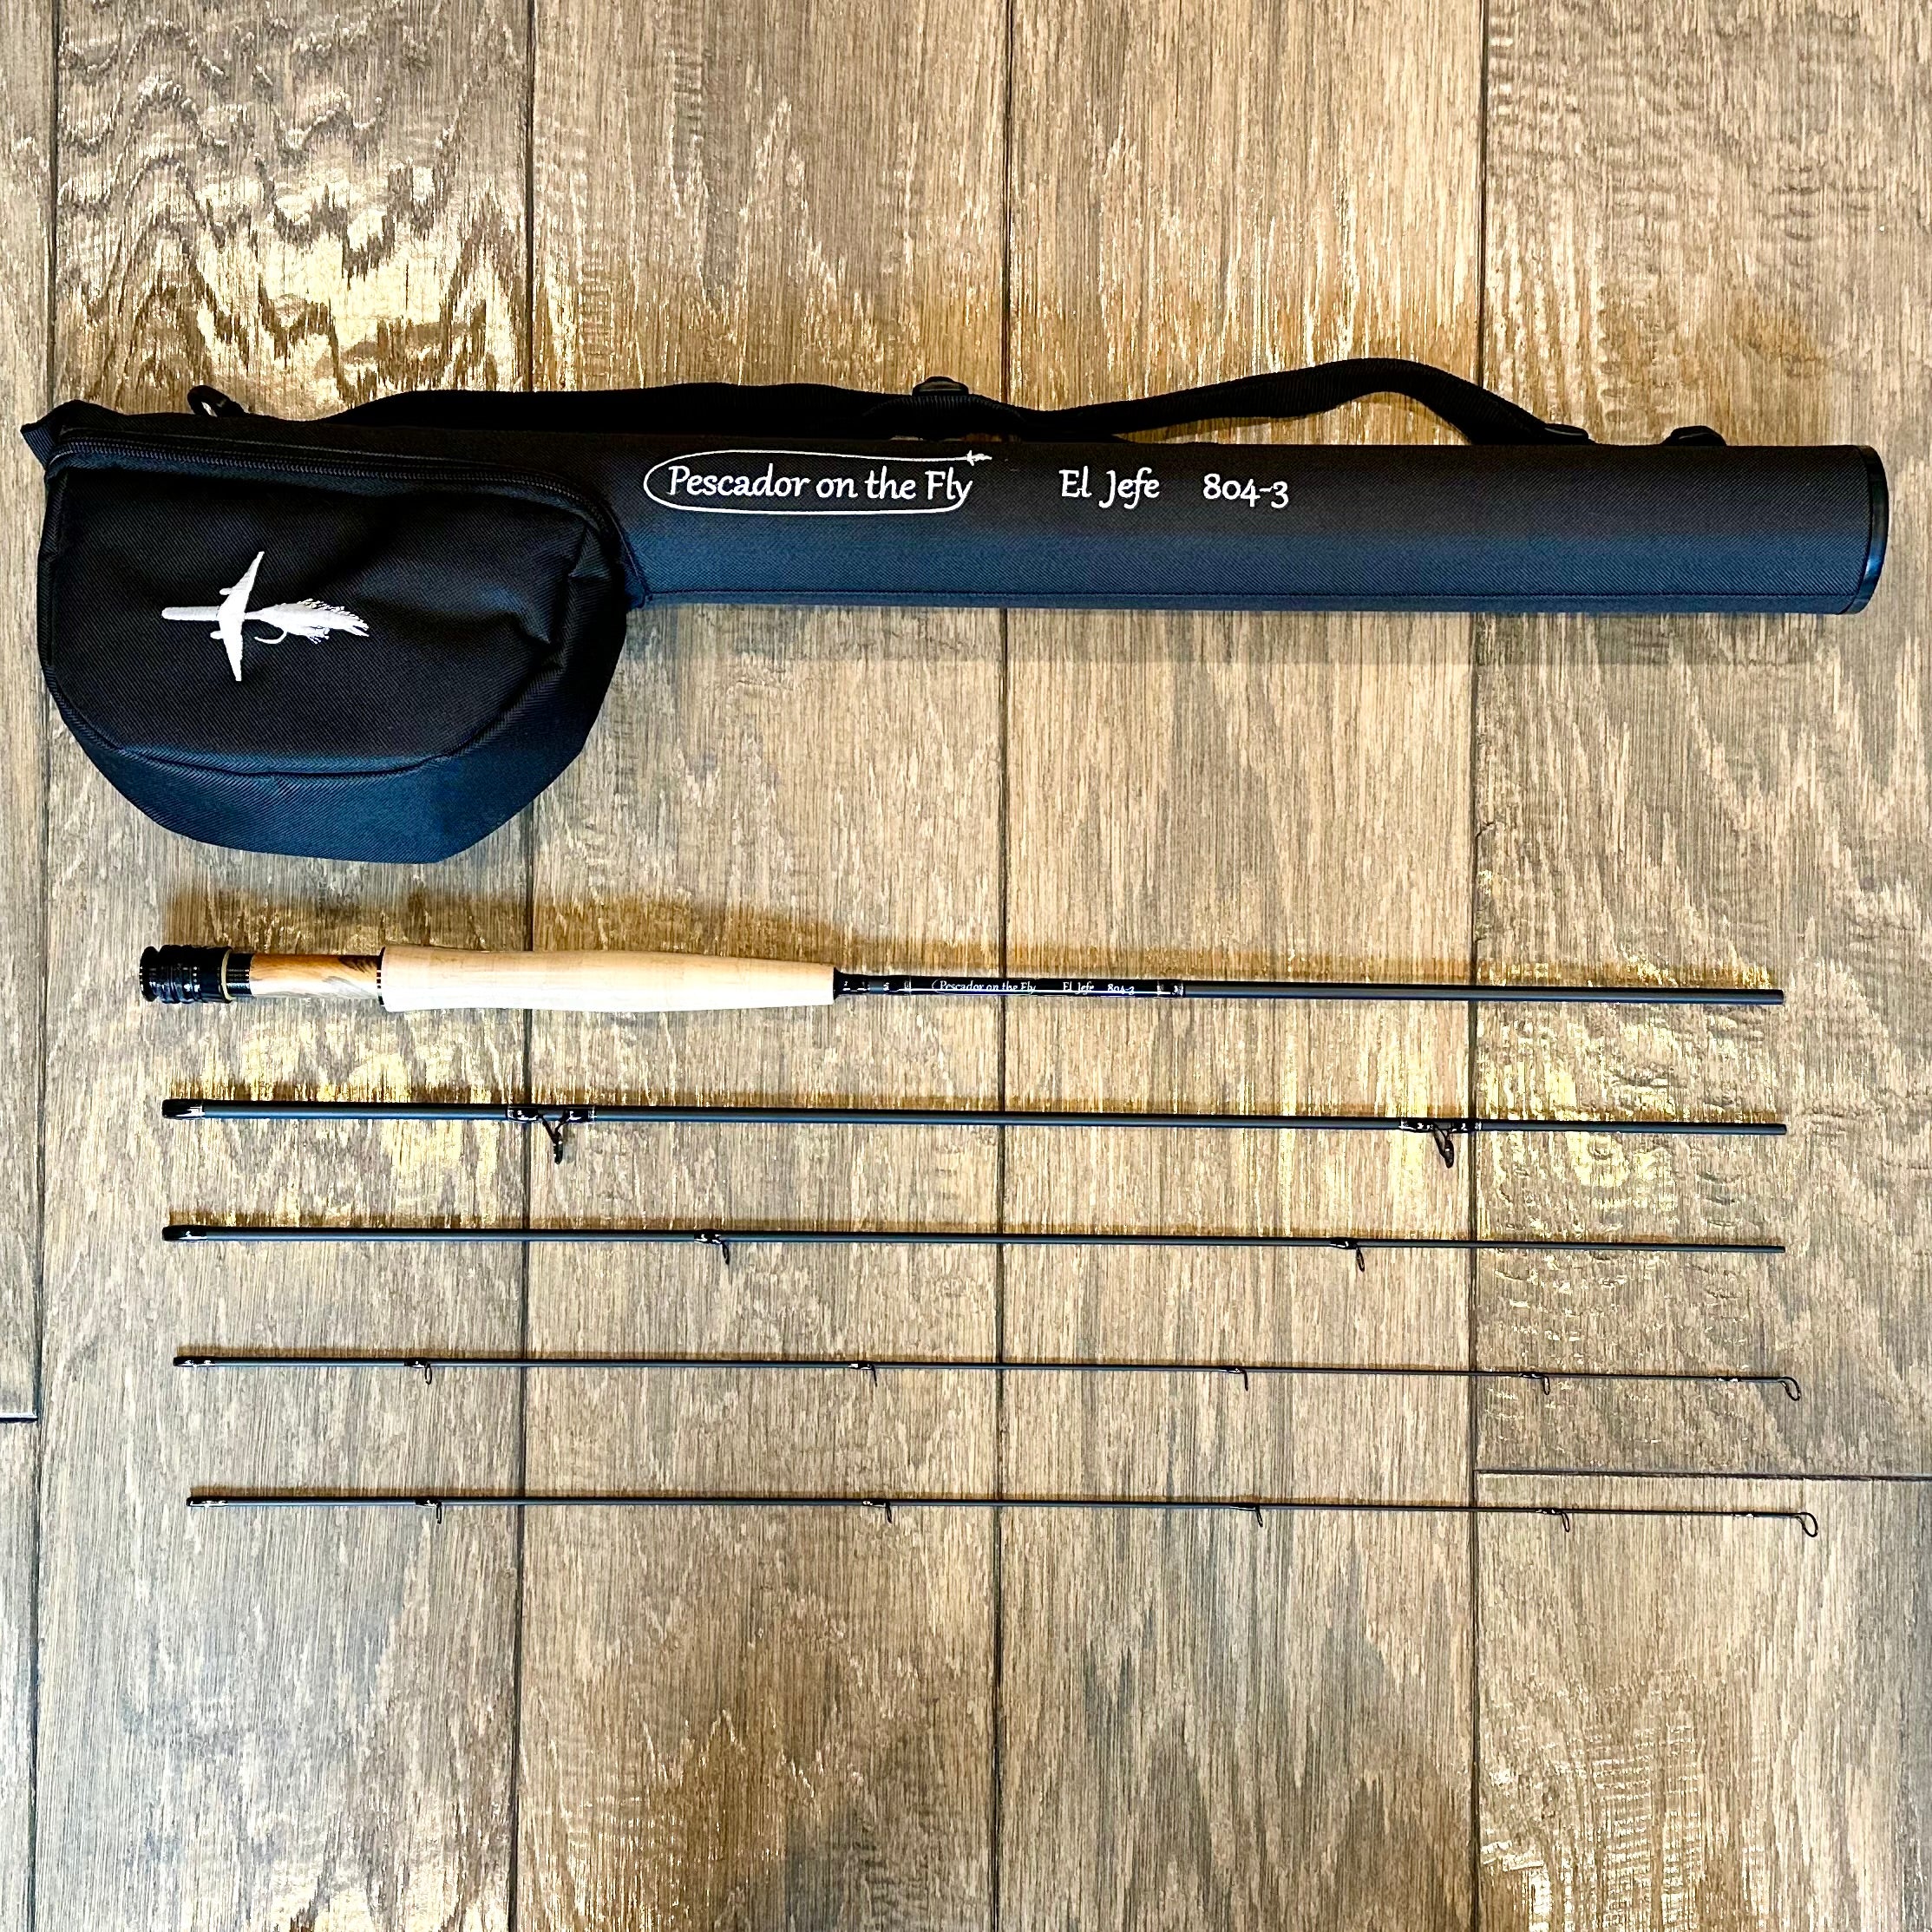 El Jefe Fly Fishing Combo Package | 804-3 | 8' Four Section 3 Weight Fly Rod And Reel Outfit